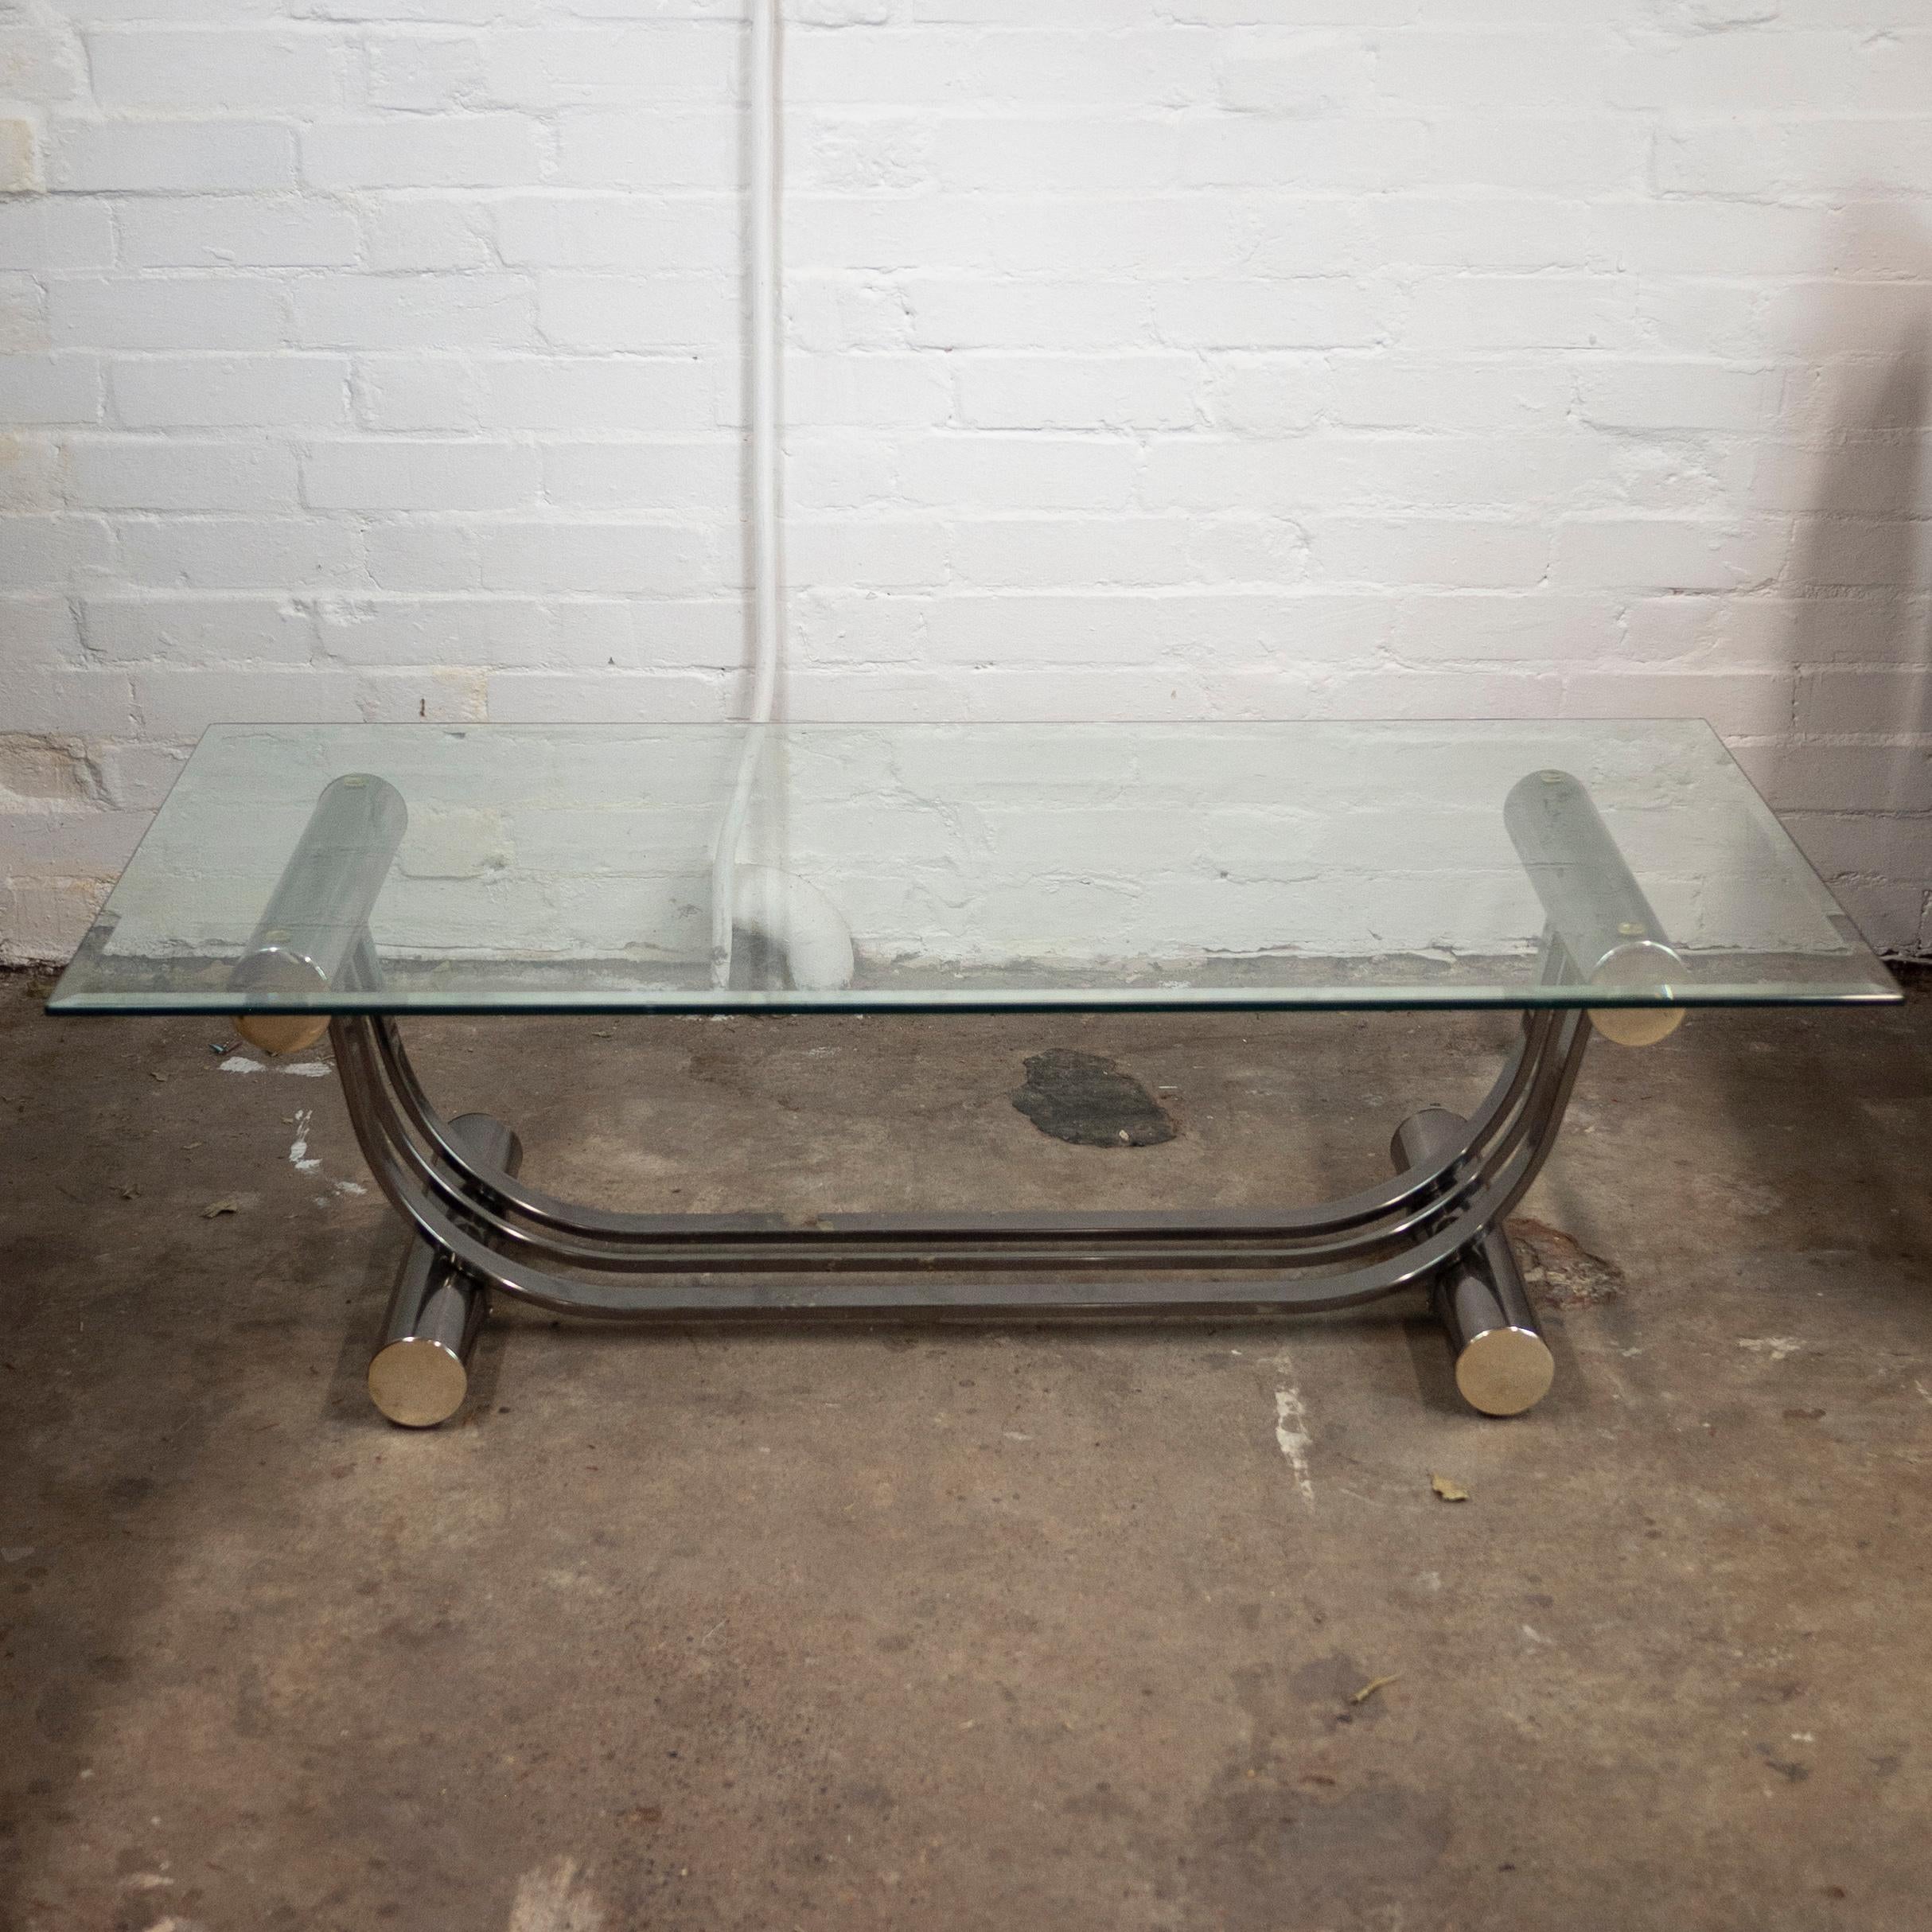 Vintage Glass and Chrome Harp Shaped Coffee Table by Dia, 1970s In Good Condition For Sale In Chesham, GB